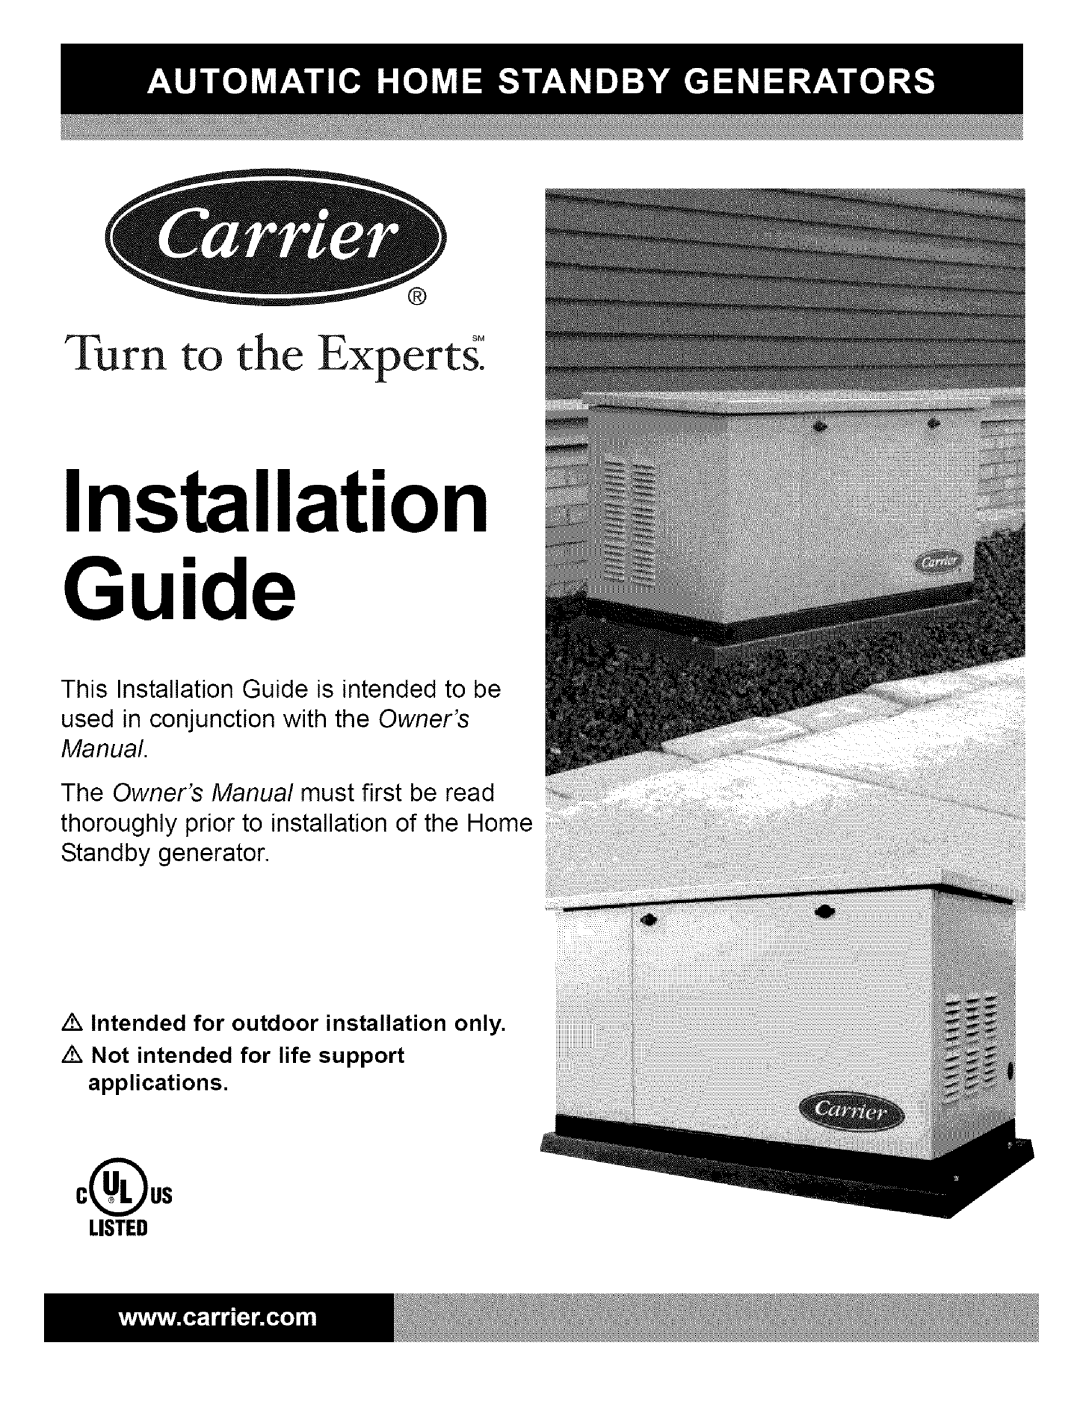 Carrier ASPB07-1SI owner manual Listed, Installation Guide, Turn to the Expertg, c 0s 